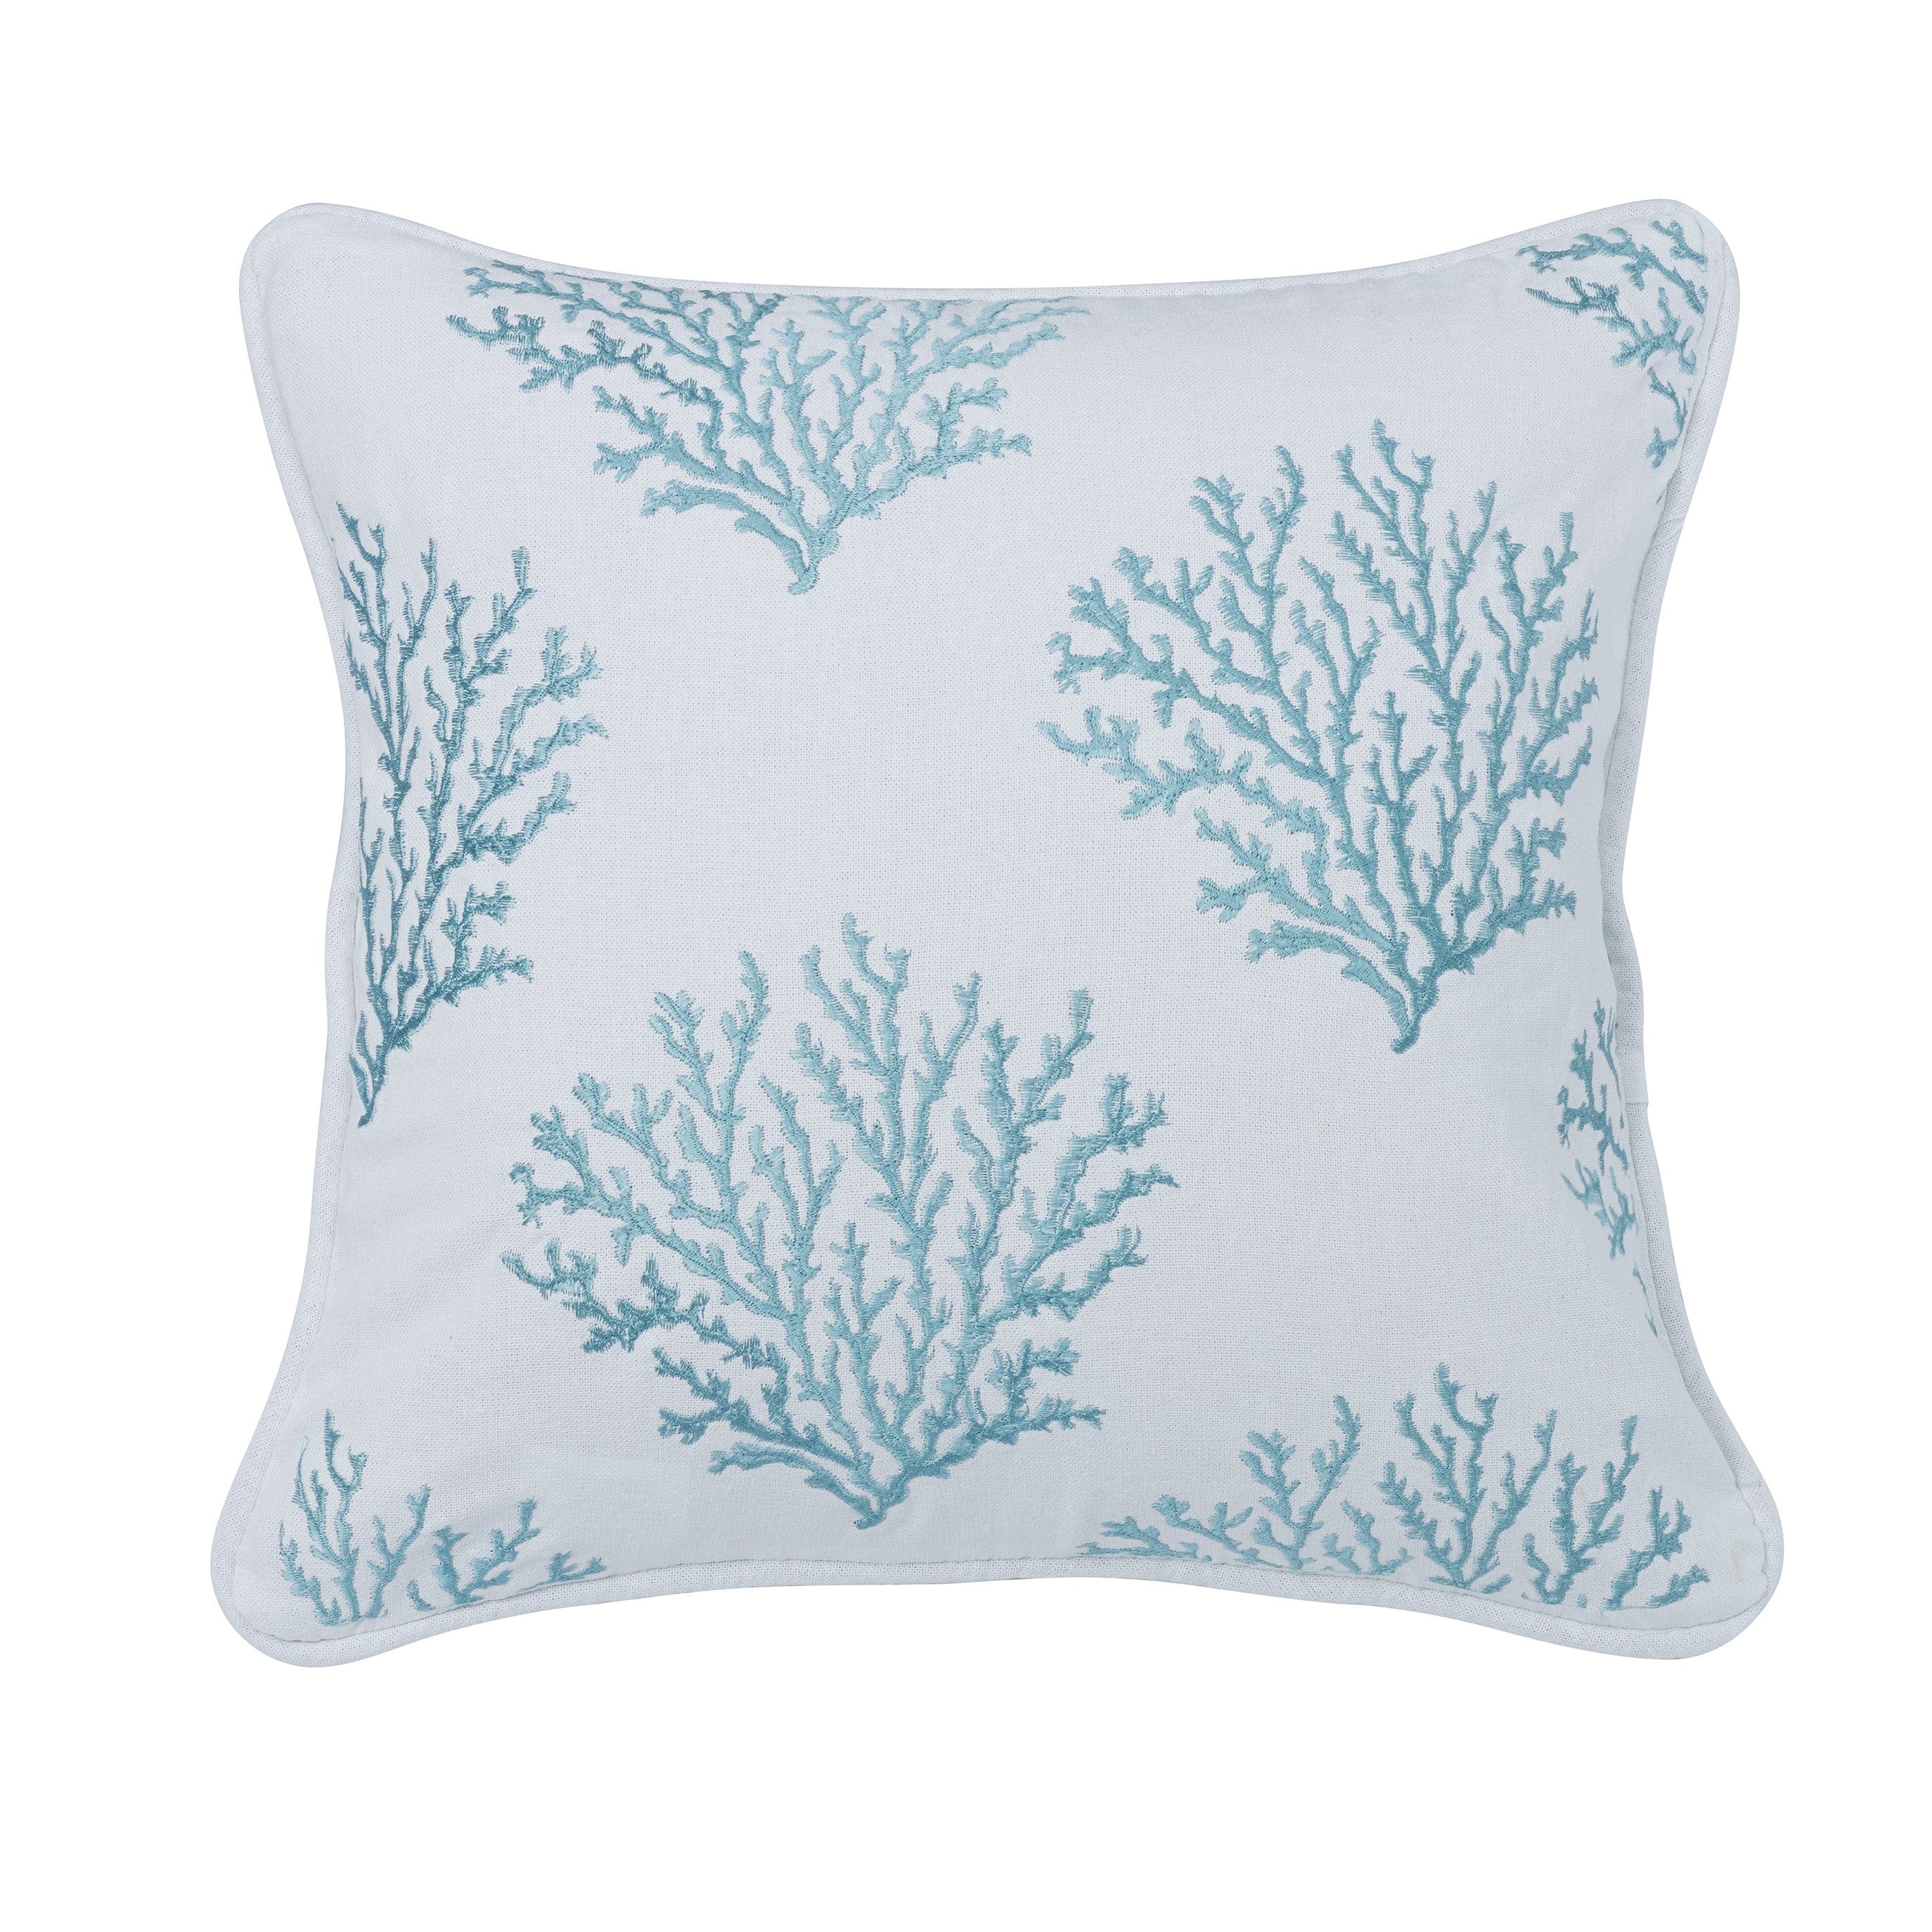 http://www.hiendaccents.com/cdn/shop/products/hiend-accents-sale-pillow-catalina-aqua-coral-embroidered-throw-pillow-18x18-pl6112-29423114092647.jpg?v=1662650093